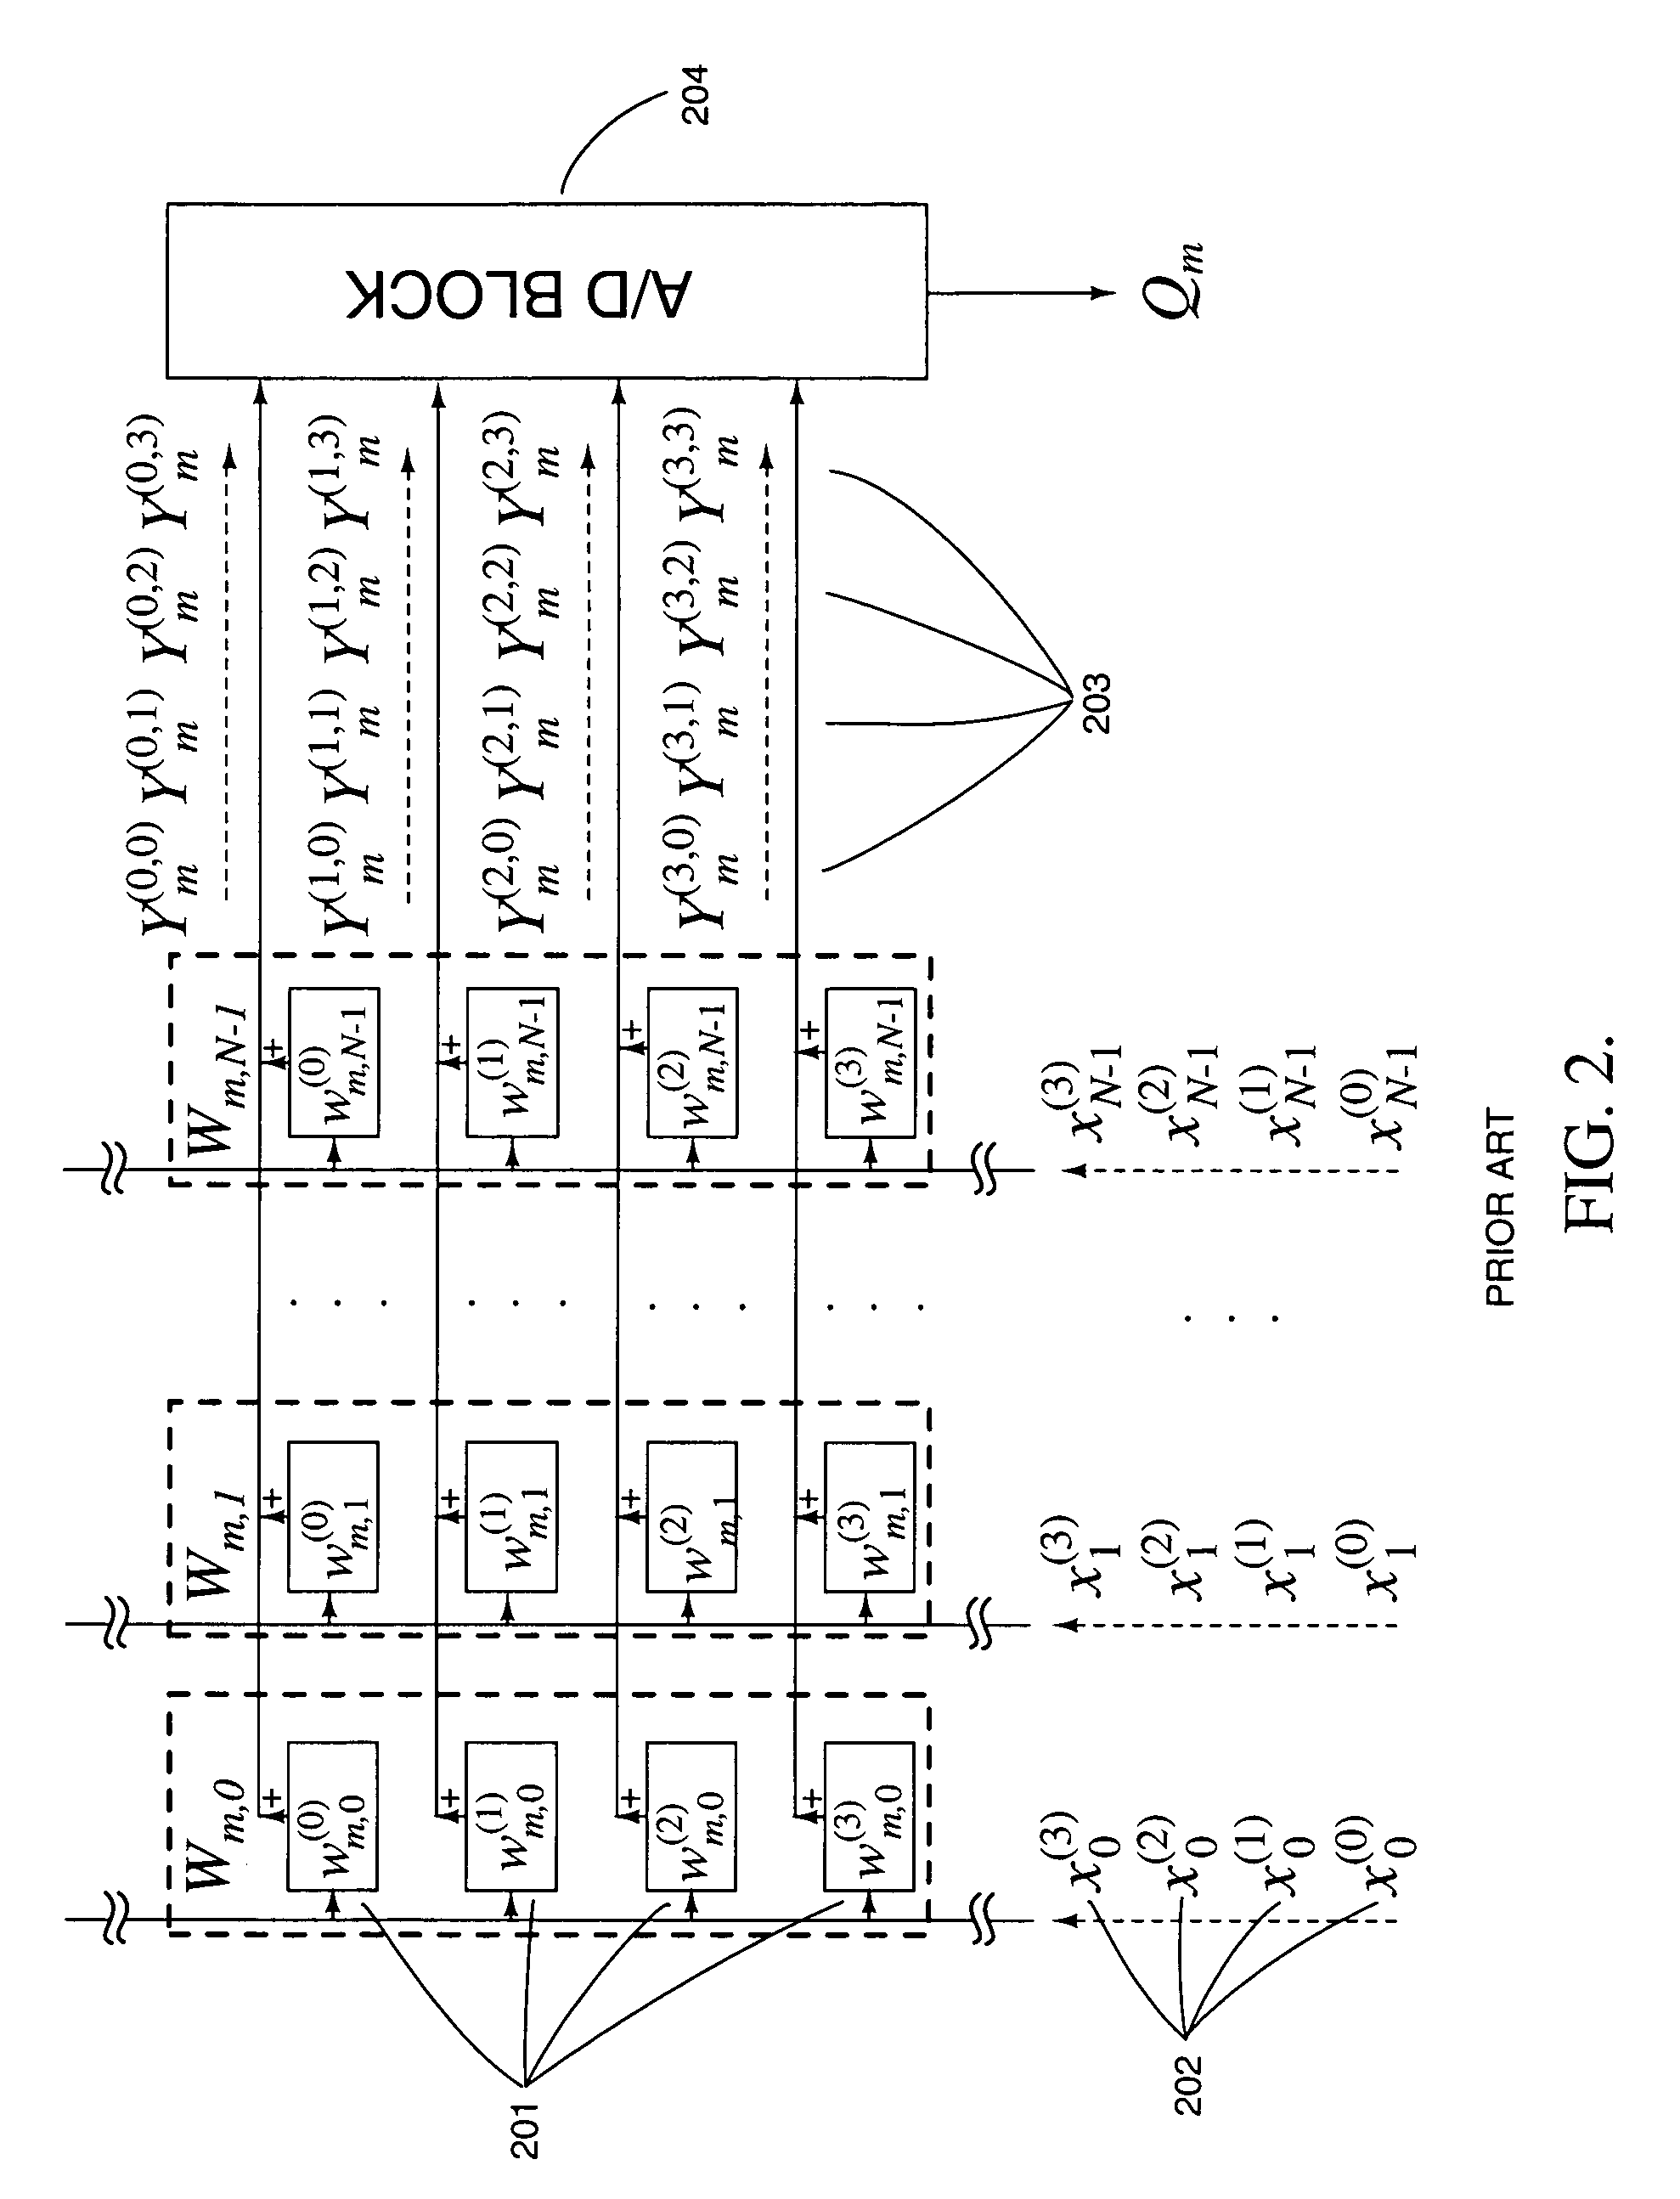 High-precision matrix-vector multiplication on a charge-mode array with embedded dynamic memory and stochastic method thereof